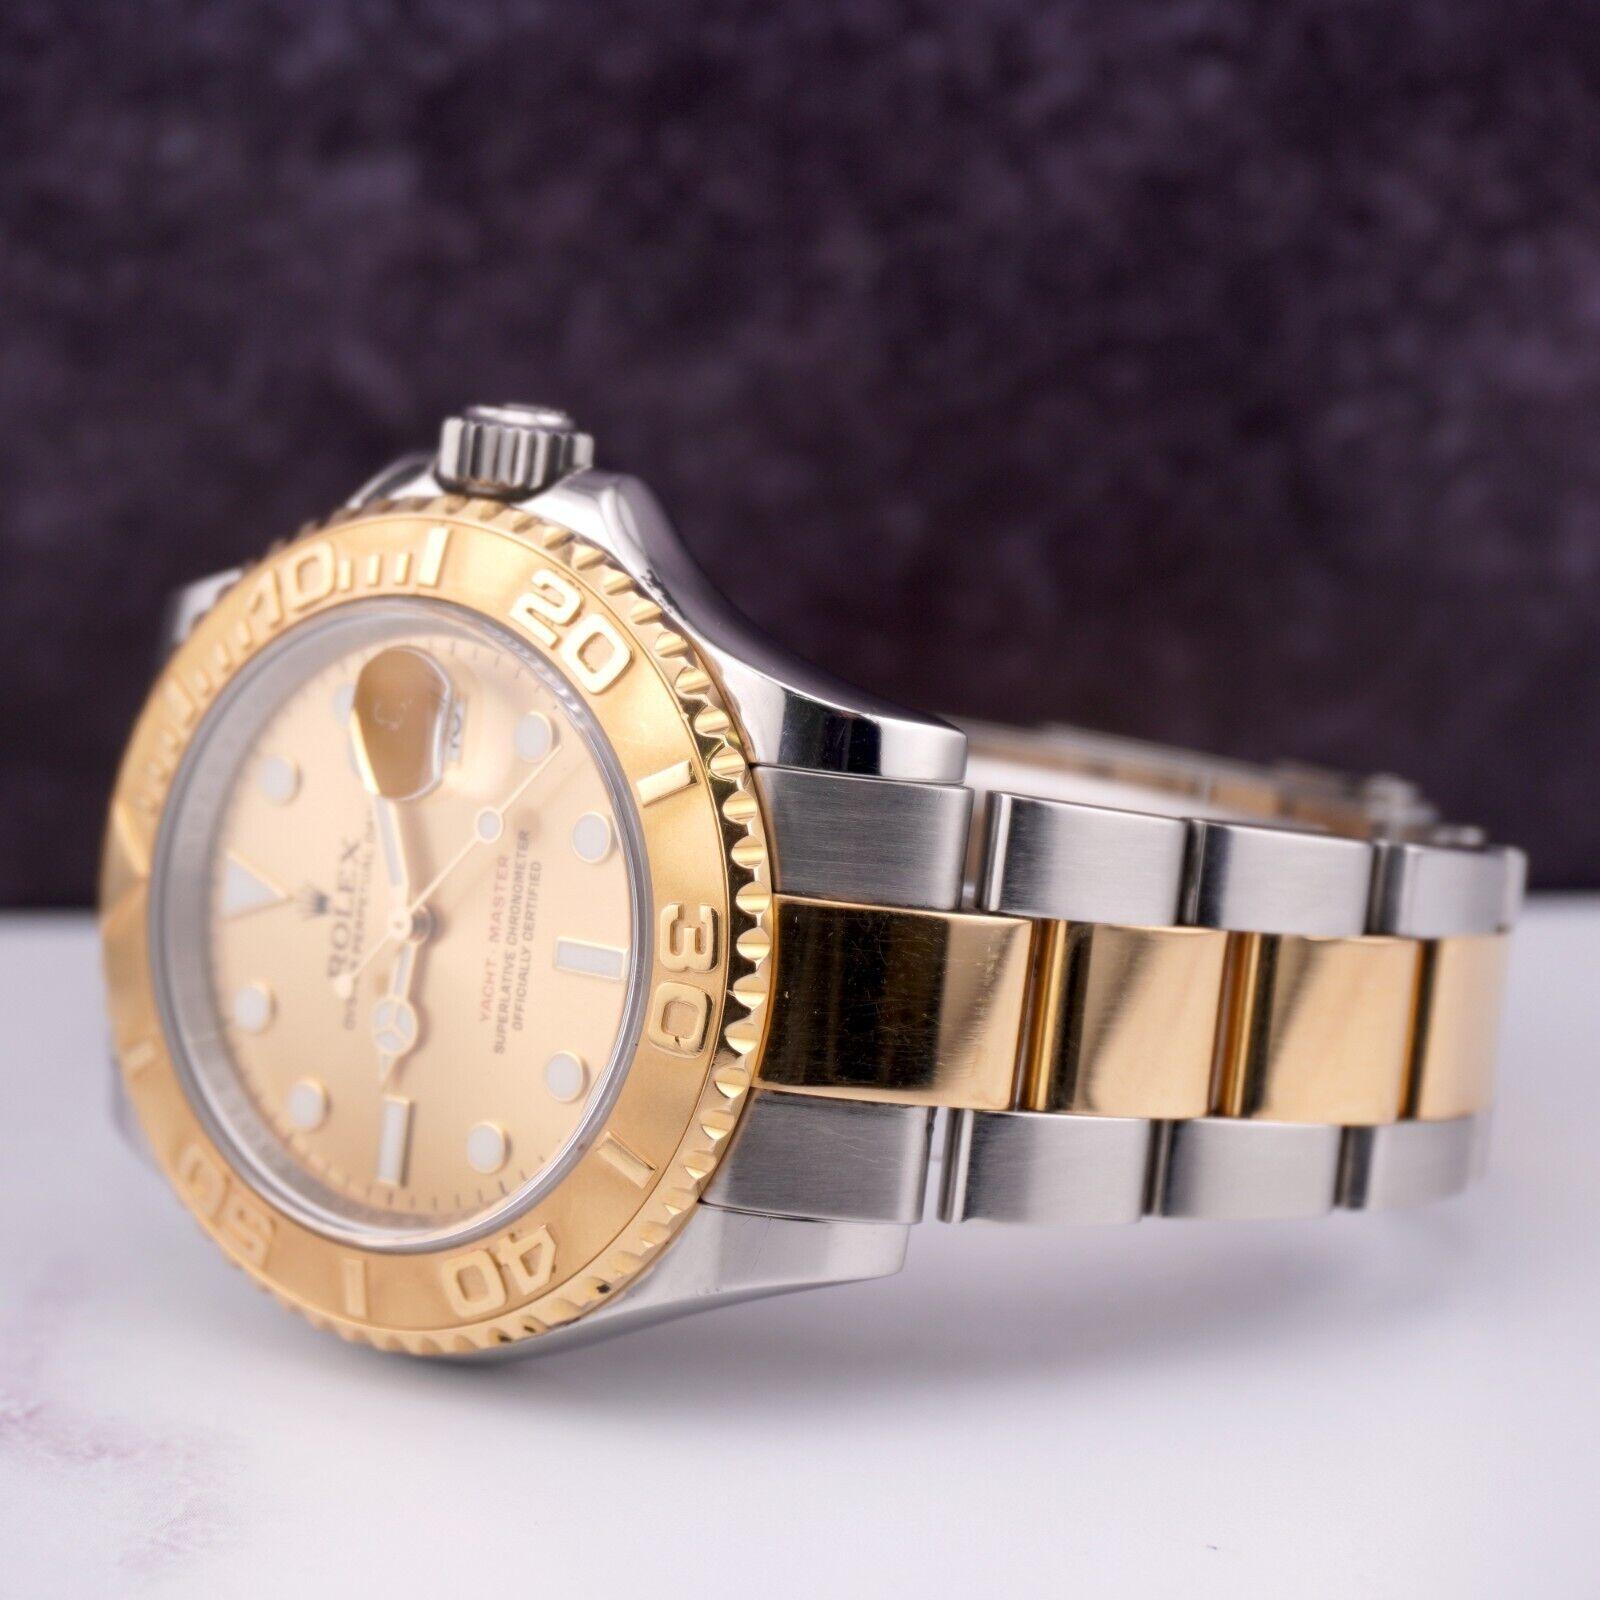 Rolex Yacht-Master 40mm Oyster Date 18k Yellow Gold & Steel Watch Dial 16623 For Sale 3